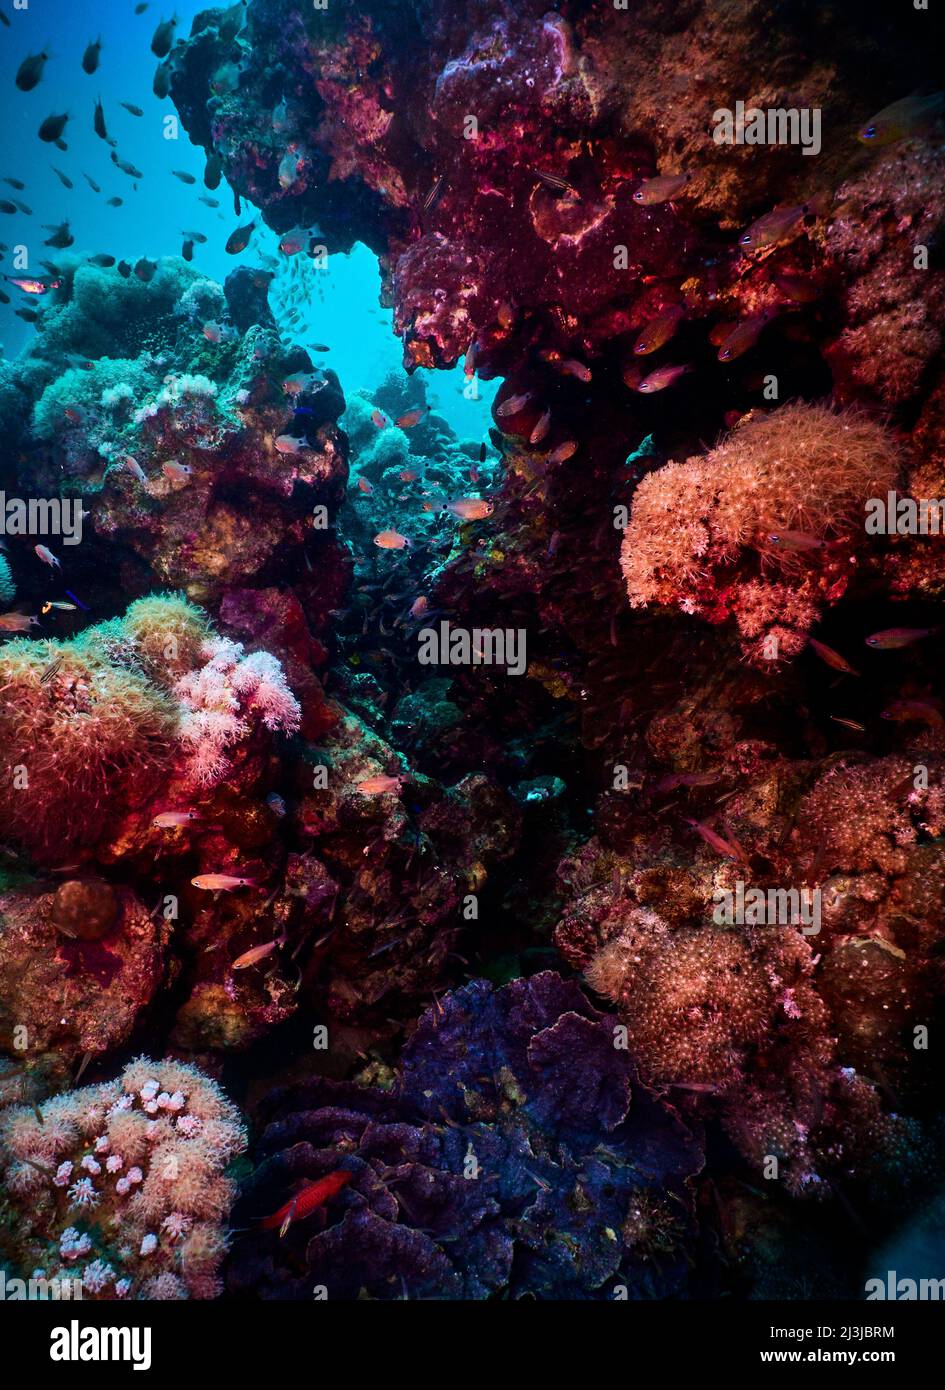 Scuba diving in the Red Sea, Makadi Bay, North Africa, Coral Reef with swarm of fishes, Stock Photo